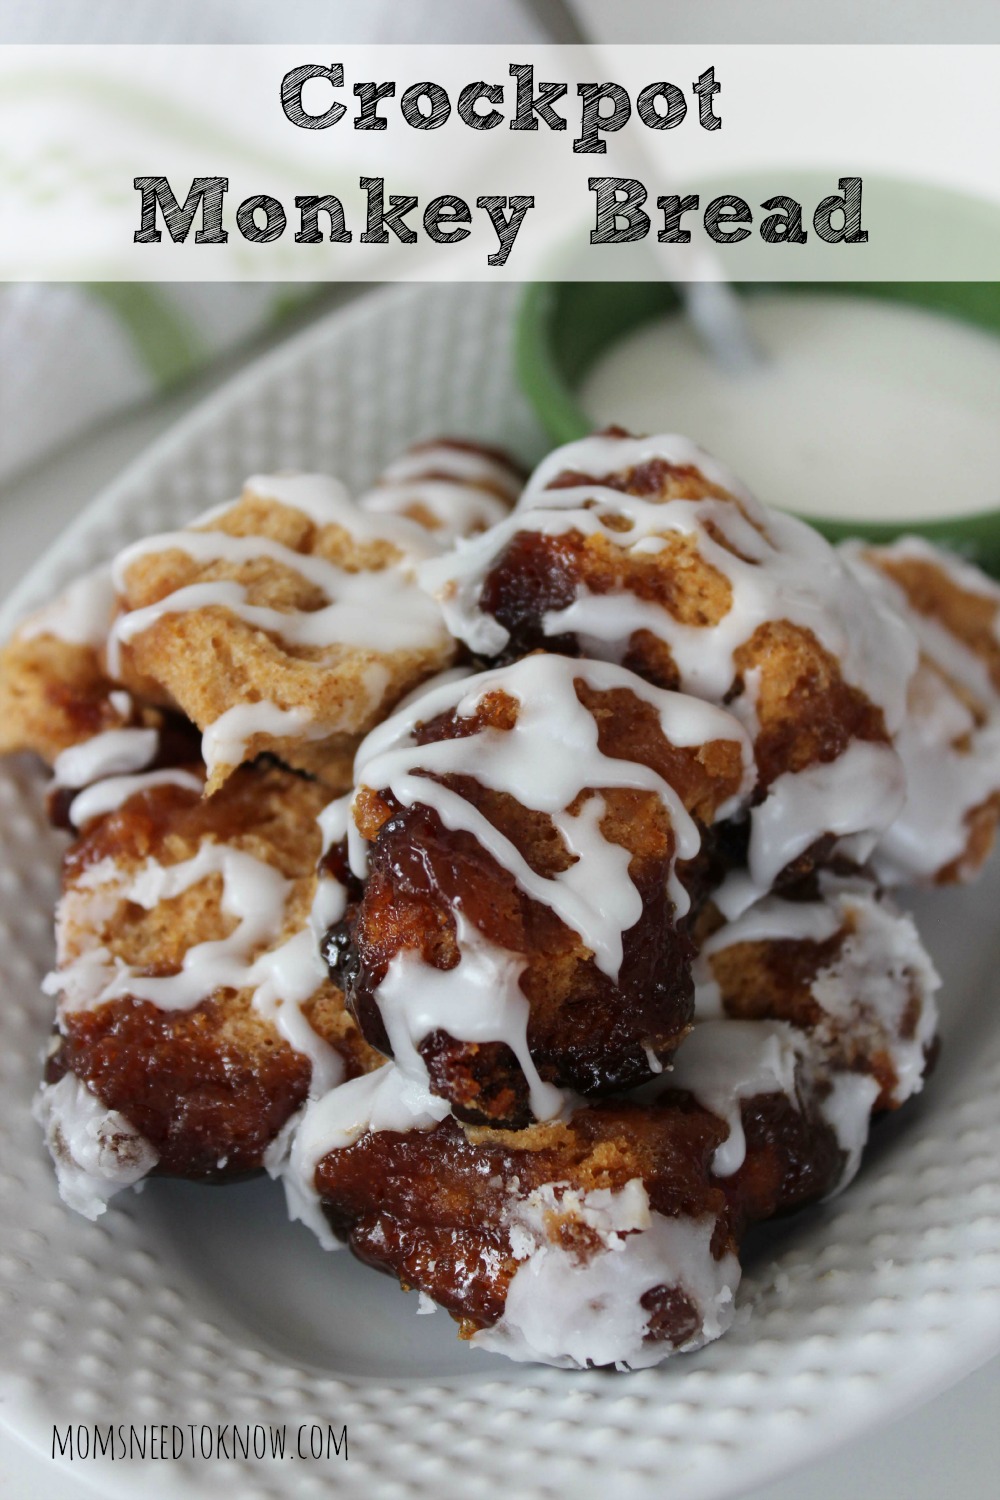 This Crockpot Cinnamon Monkey Bread smells amazing while it is cooking and is a favorite in our house. It takes just a few minutes to prepare!